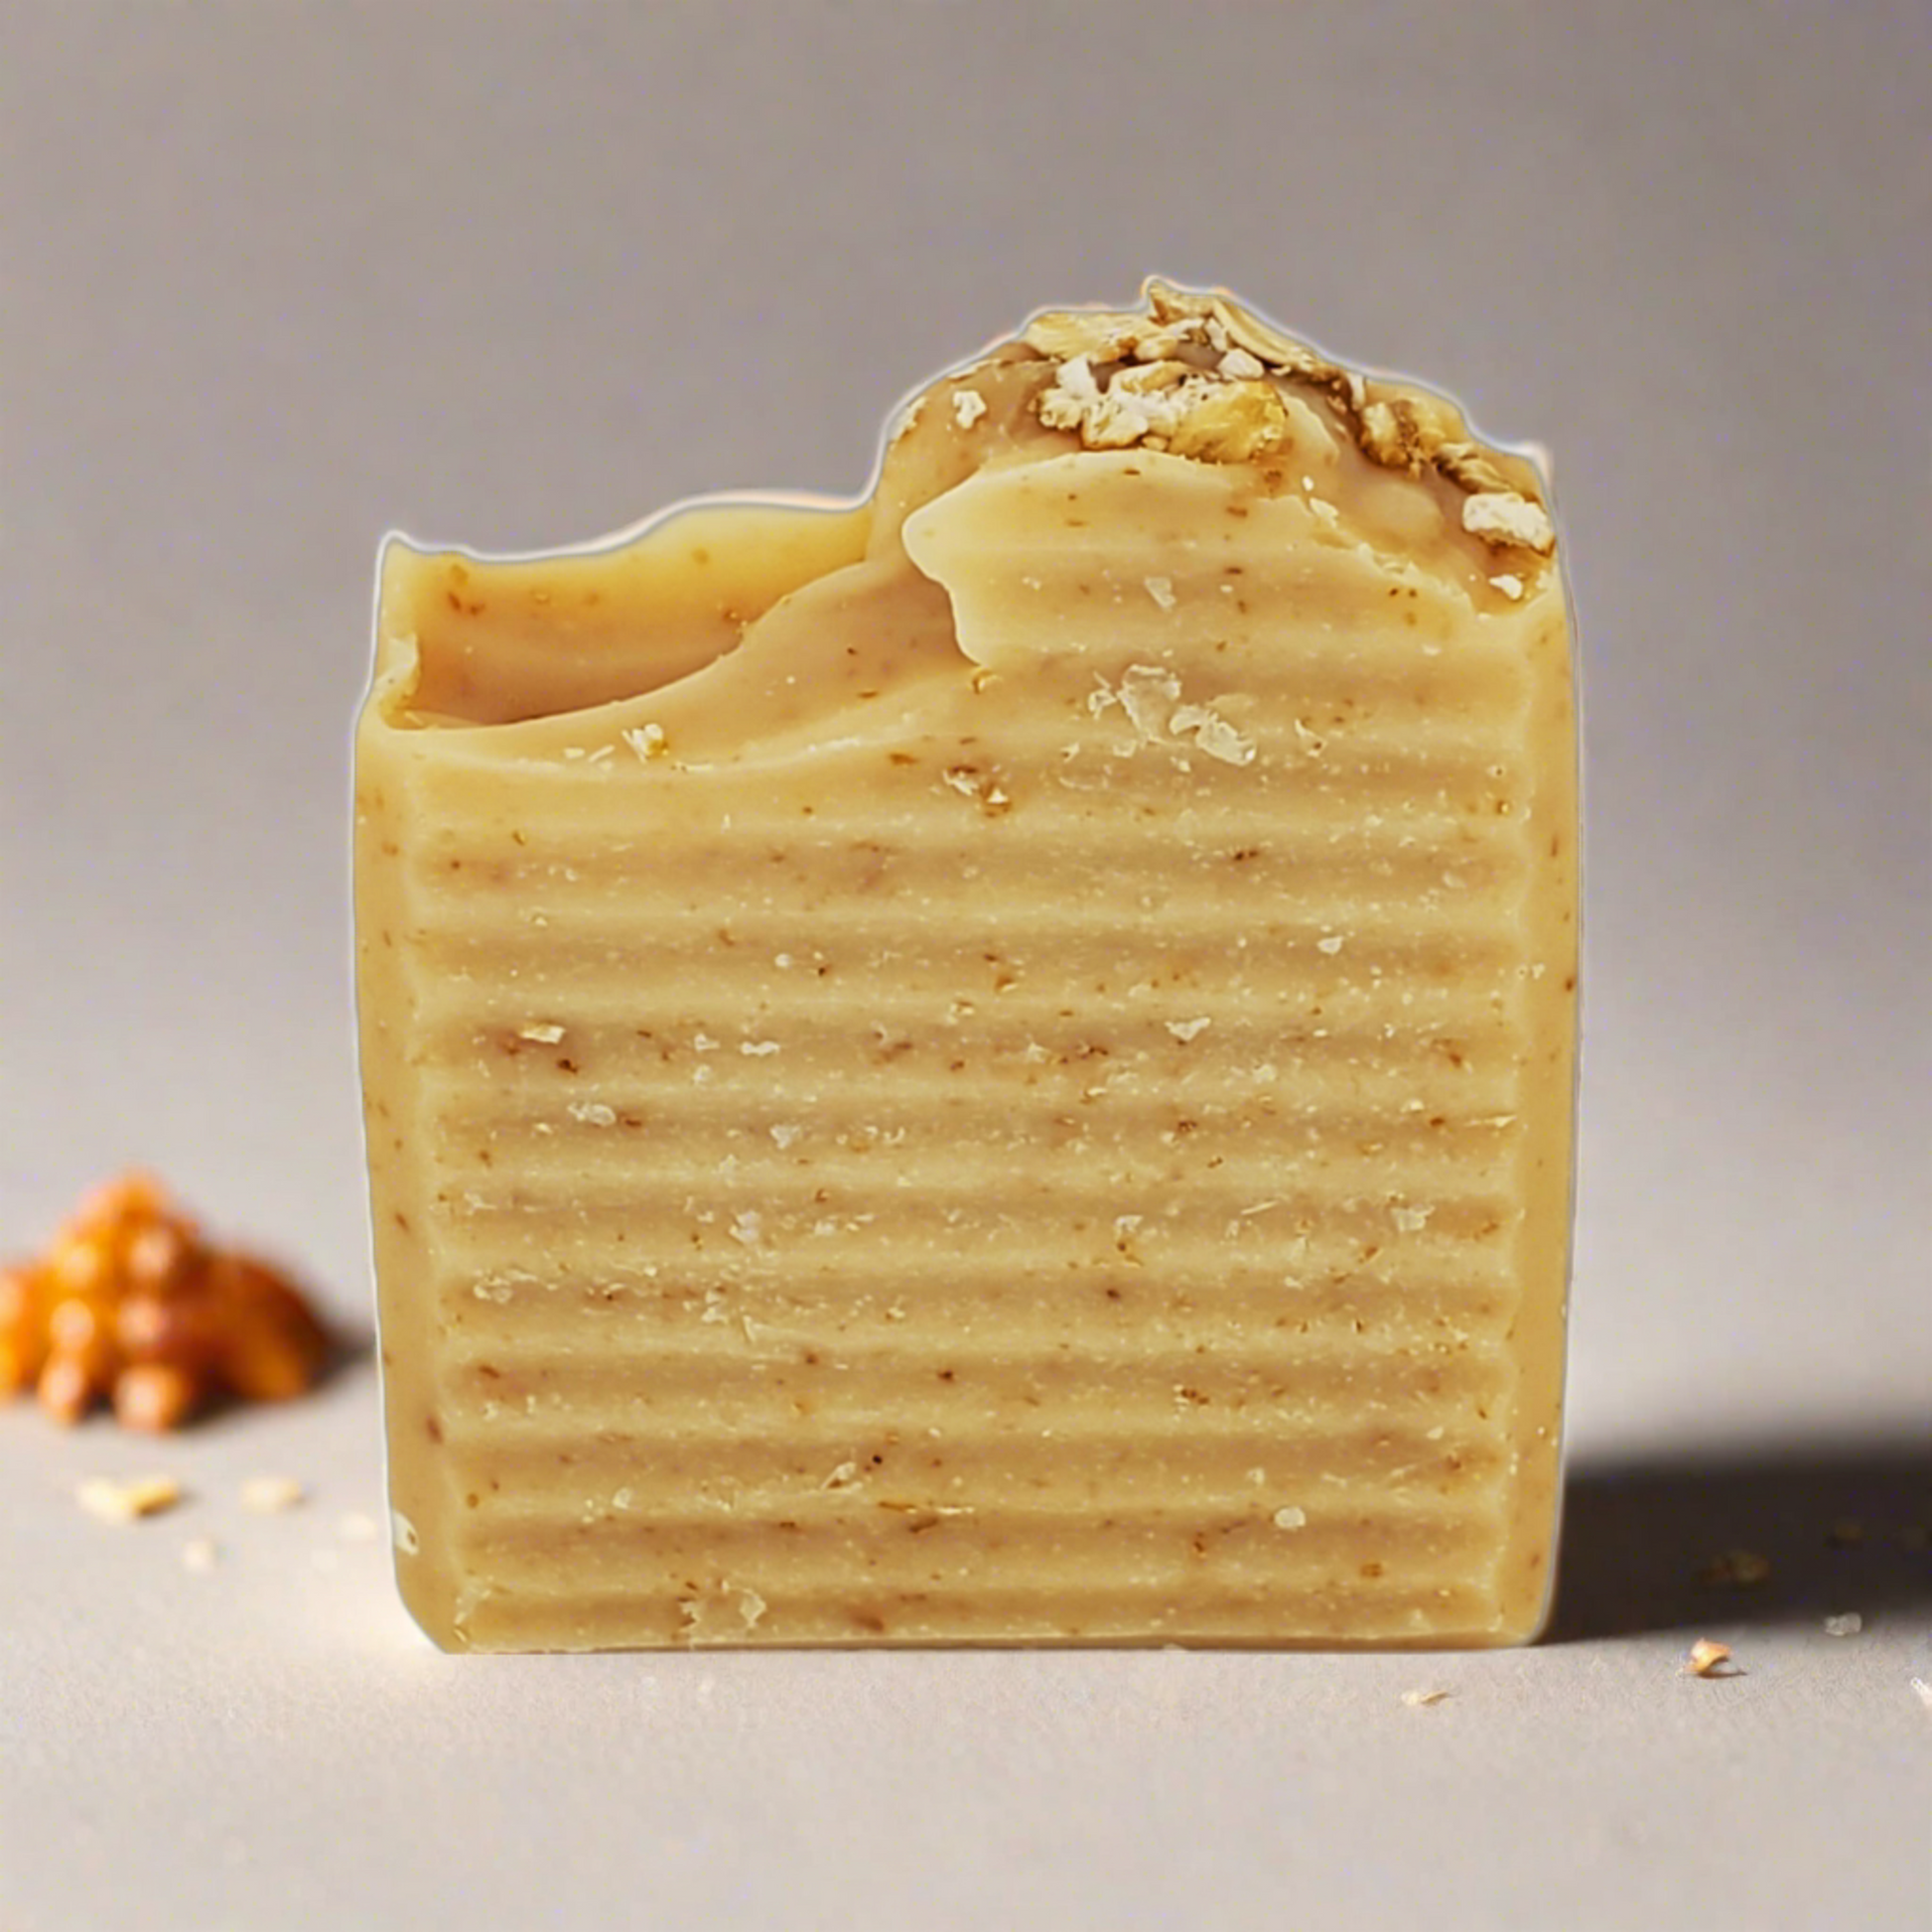 Image of Oat & Honey Natural Bar Soap from The Butter Project.